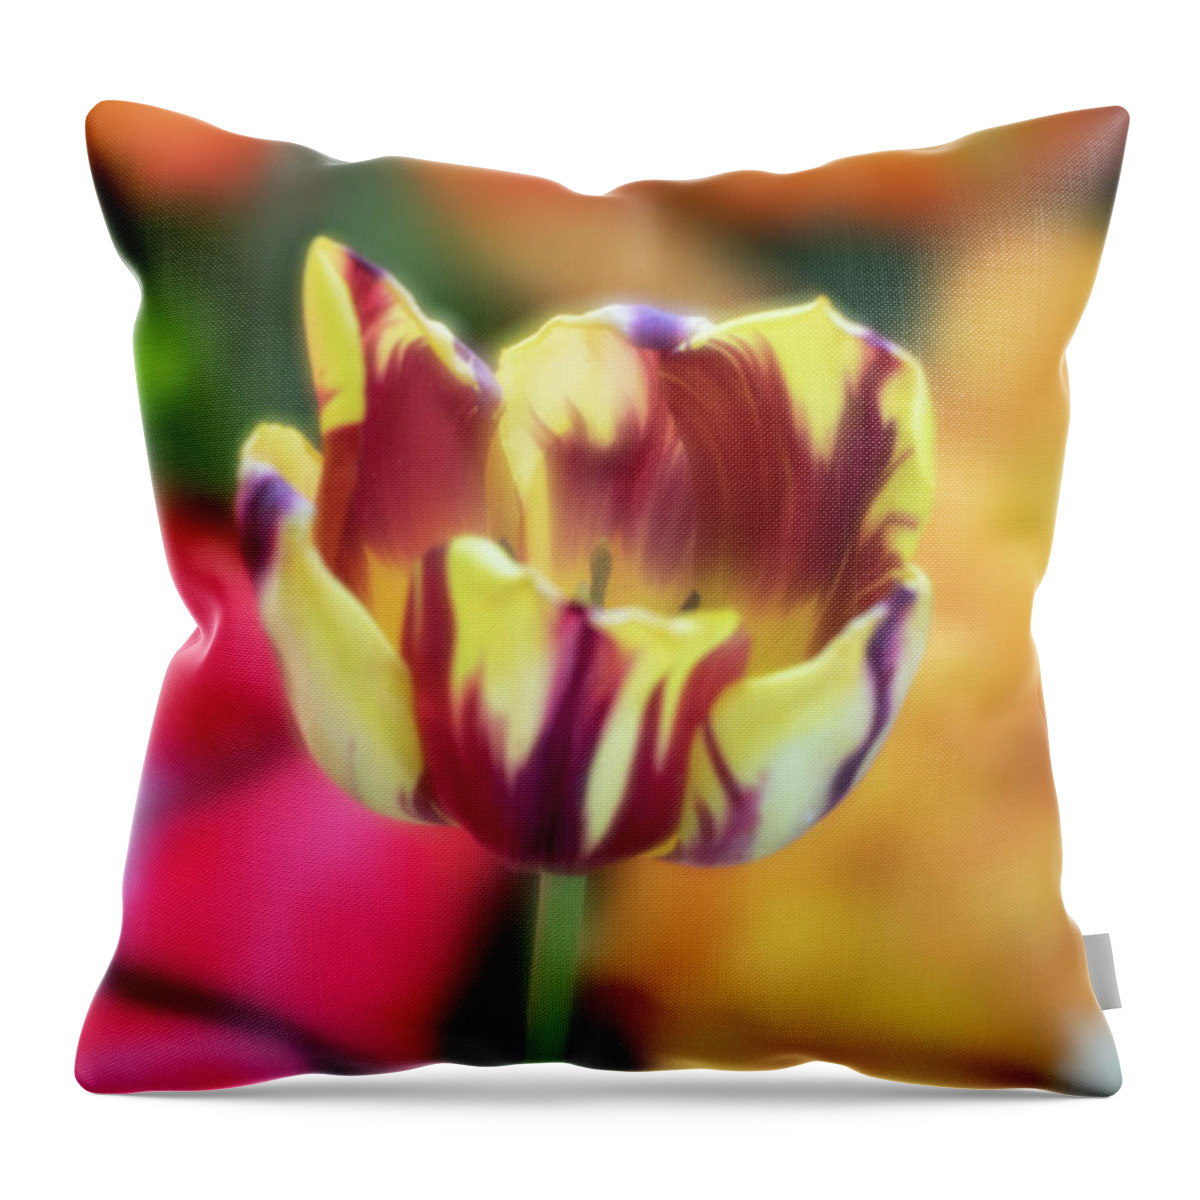 Tiger Tulip Flower Floral Botany Botanical Botanic Softfocus Soft Focus Brian Hale Brianhalephoto Ma Mass Massachusetts New England Newengland U.s.a. Usa Throw Pillow featuring the photograph Tiger Tulip 2 by Brian Hale